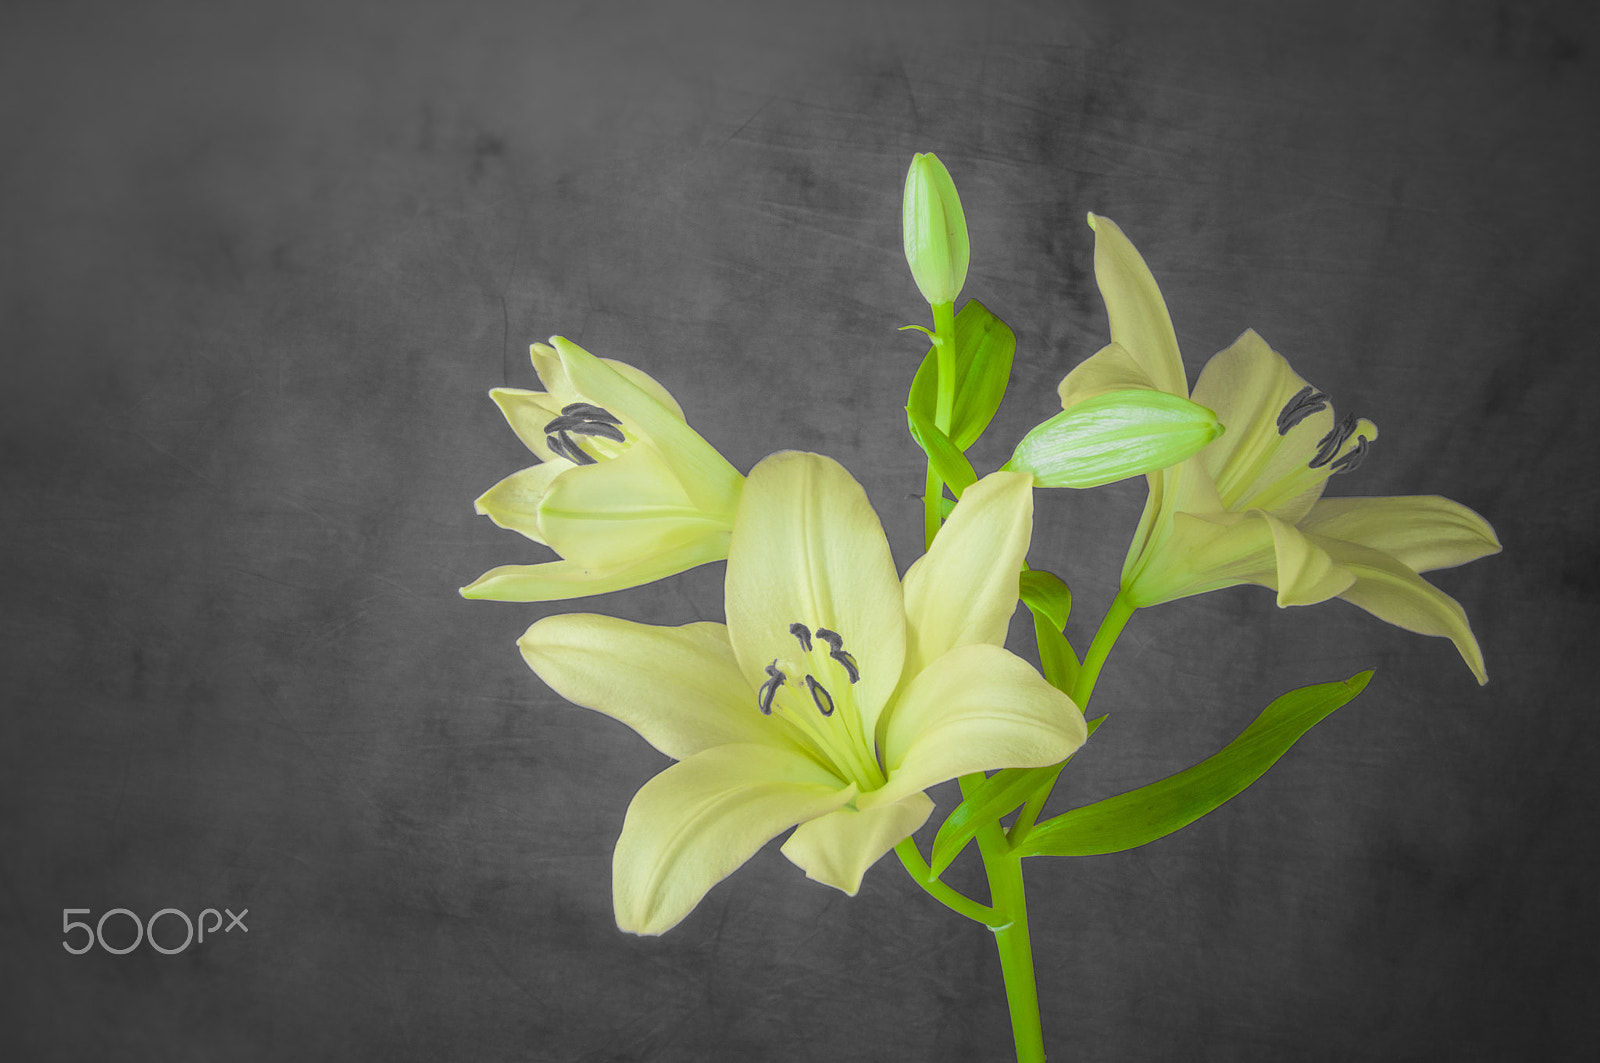 Nikon D300 sample photo. Lily flower in bloom photography